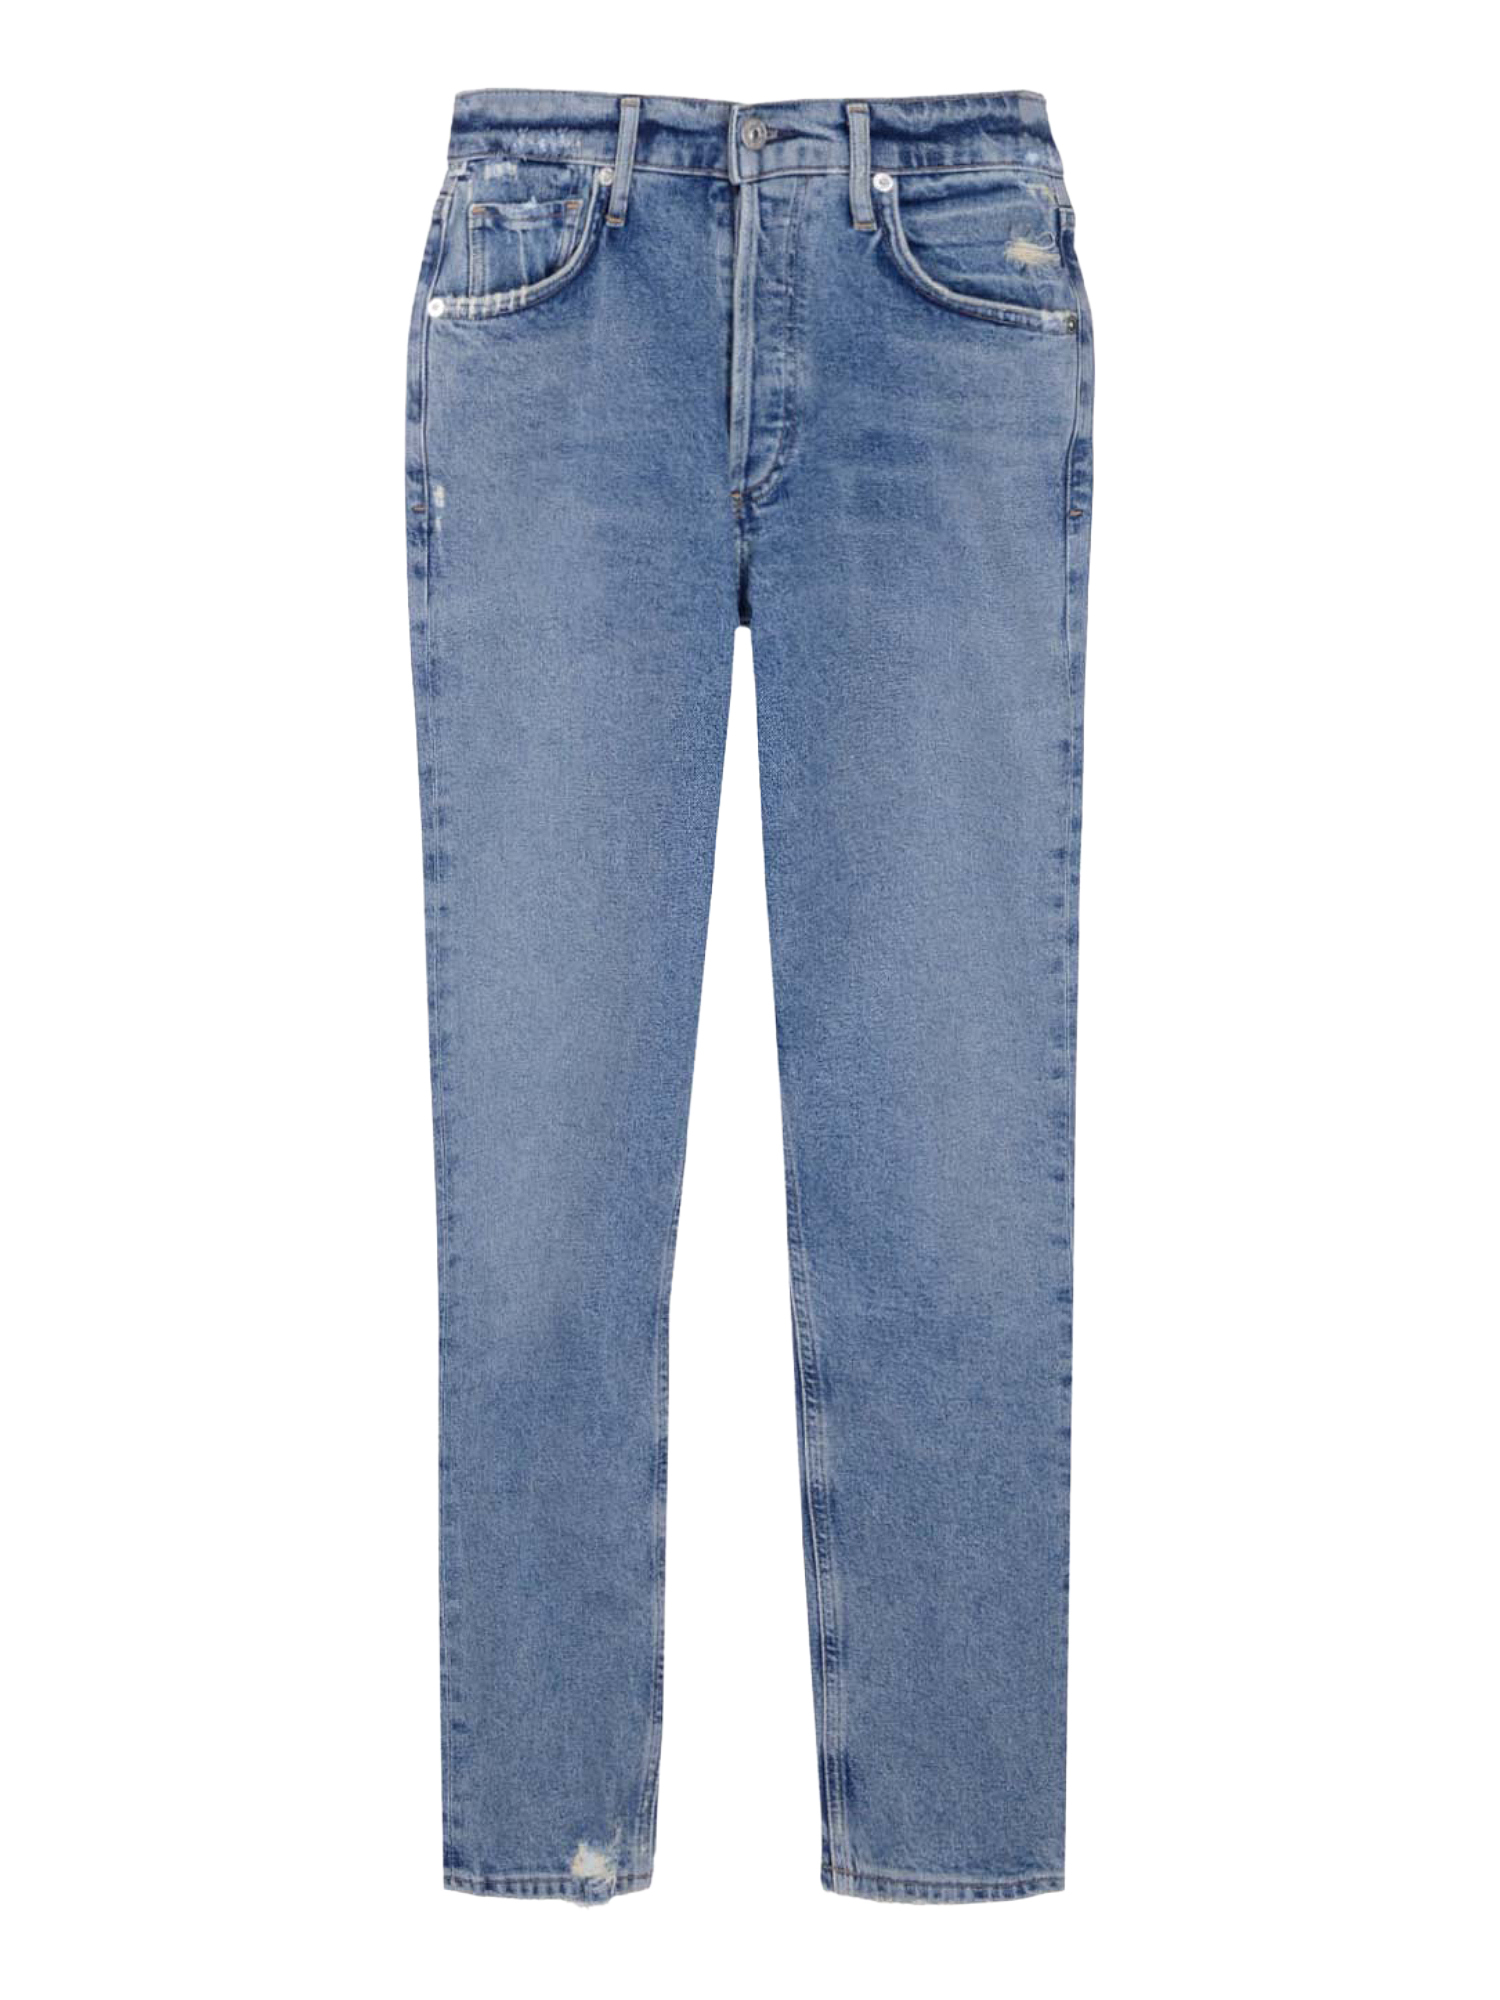 CITIZENS OF HUMANITY WOMEN'S JEANS - CITIZENS OF HUMANITY - IN BLUE COTTON